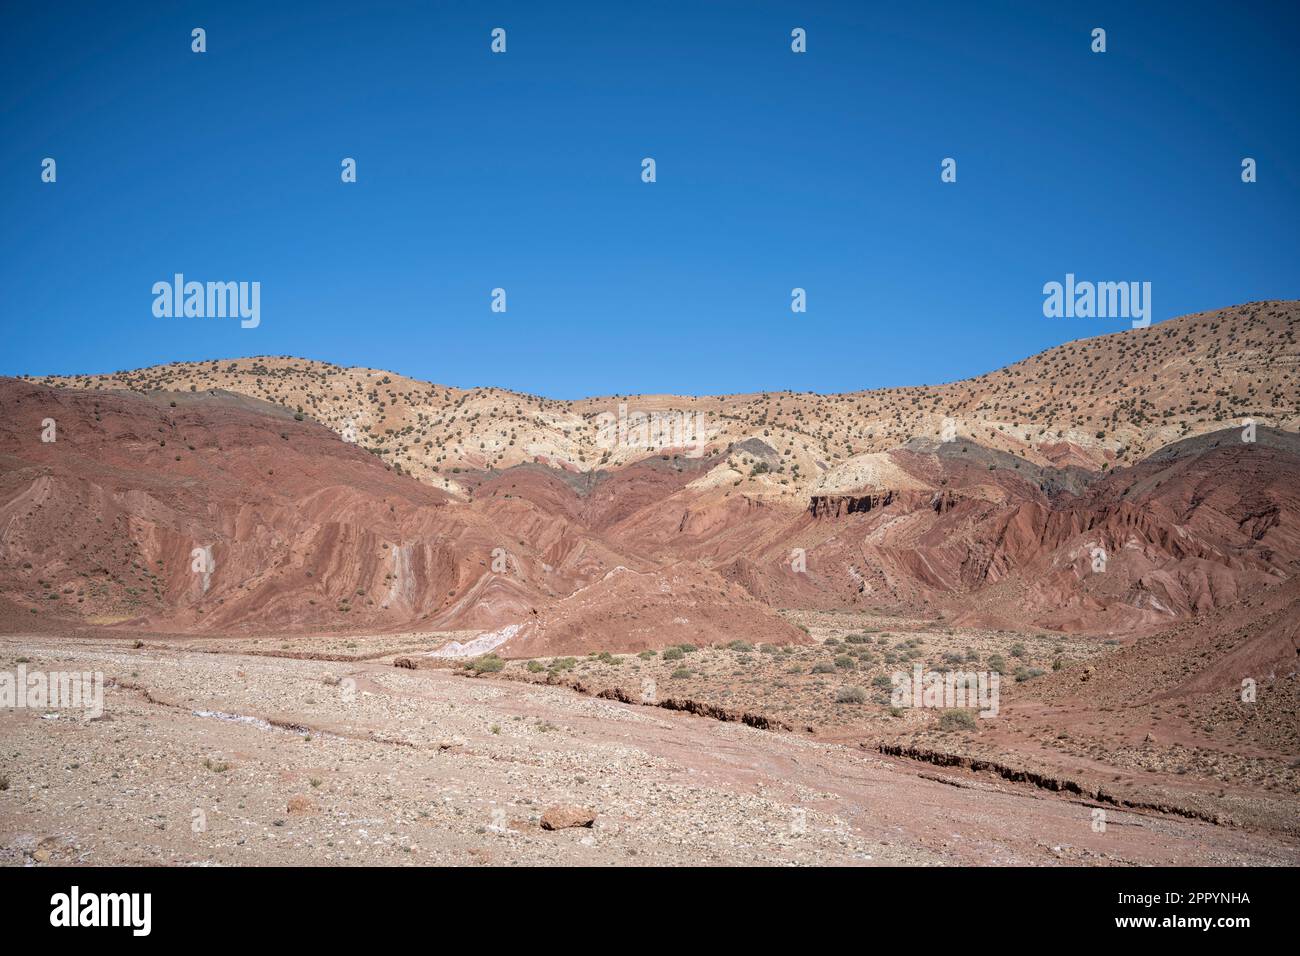 Landscape of desert mountains in the vicinity of Telouet. Stock Photo